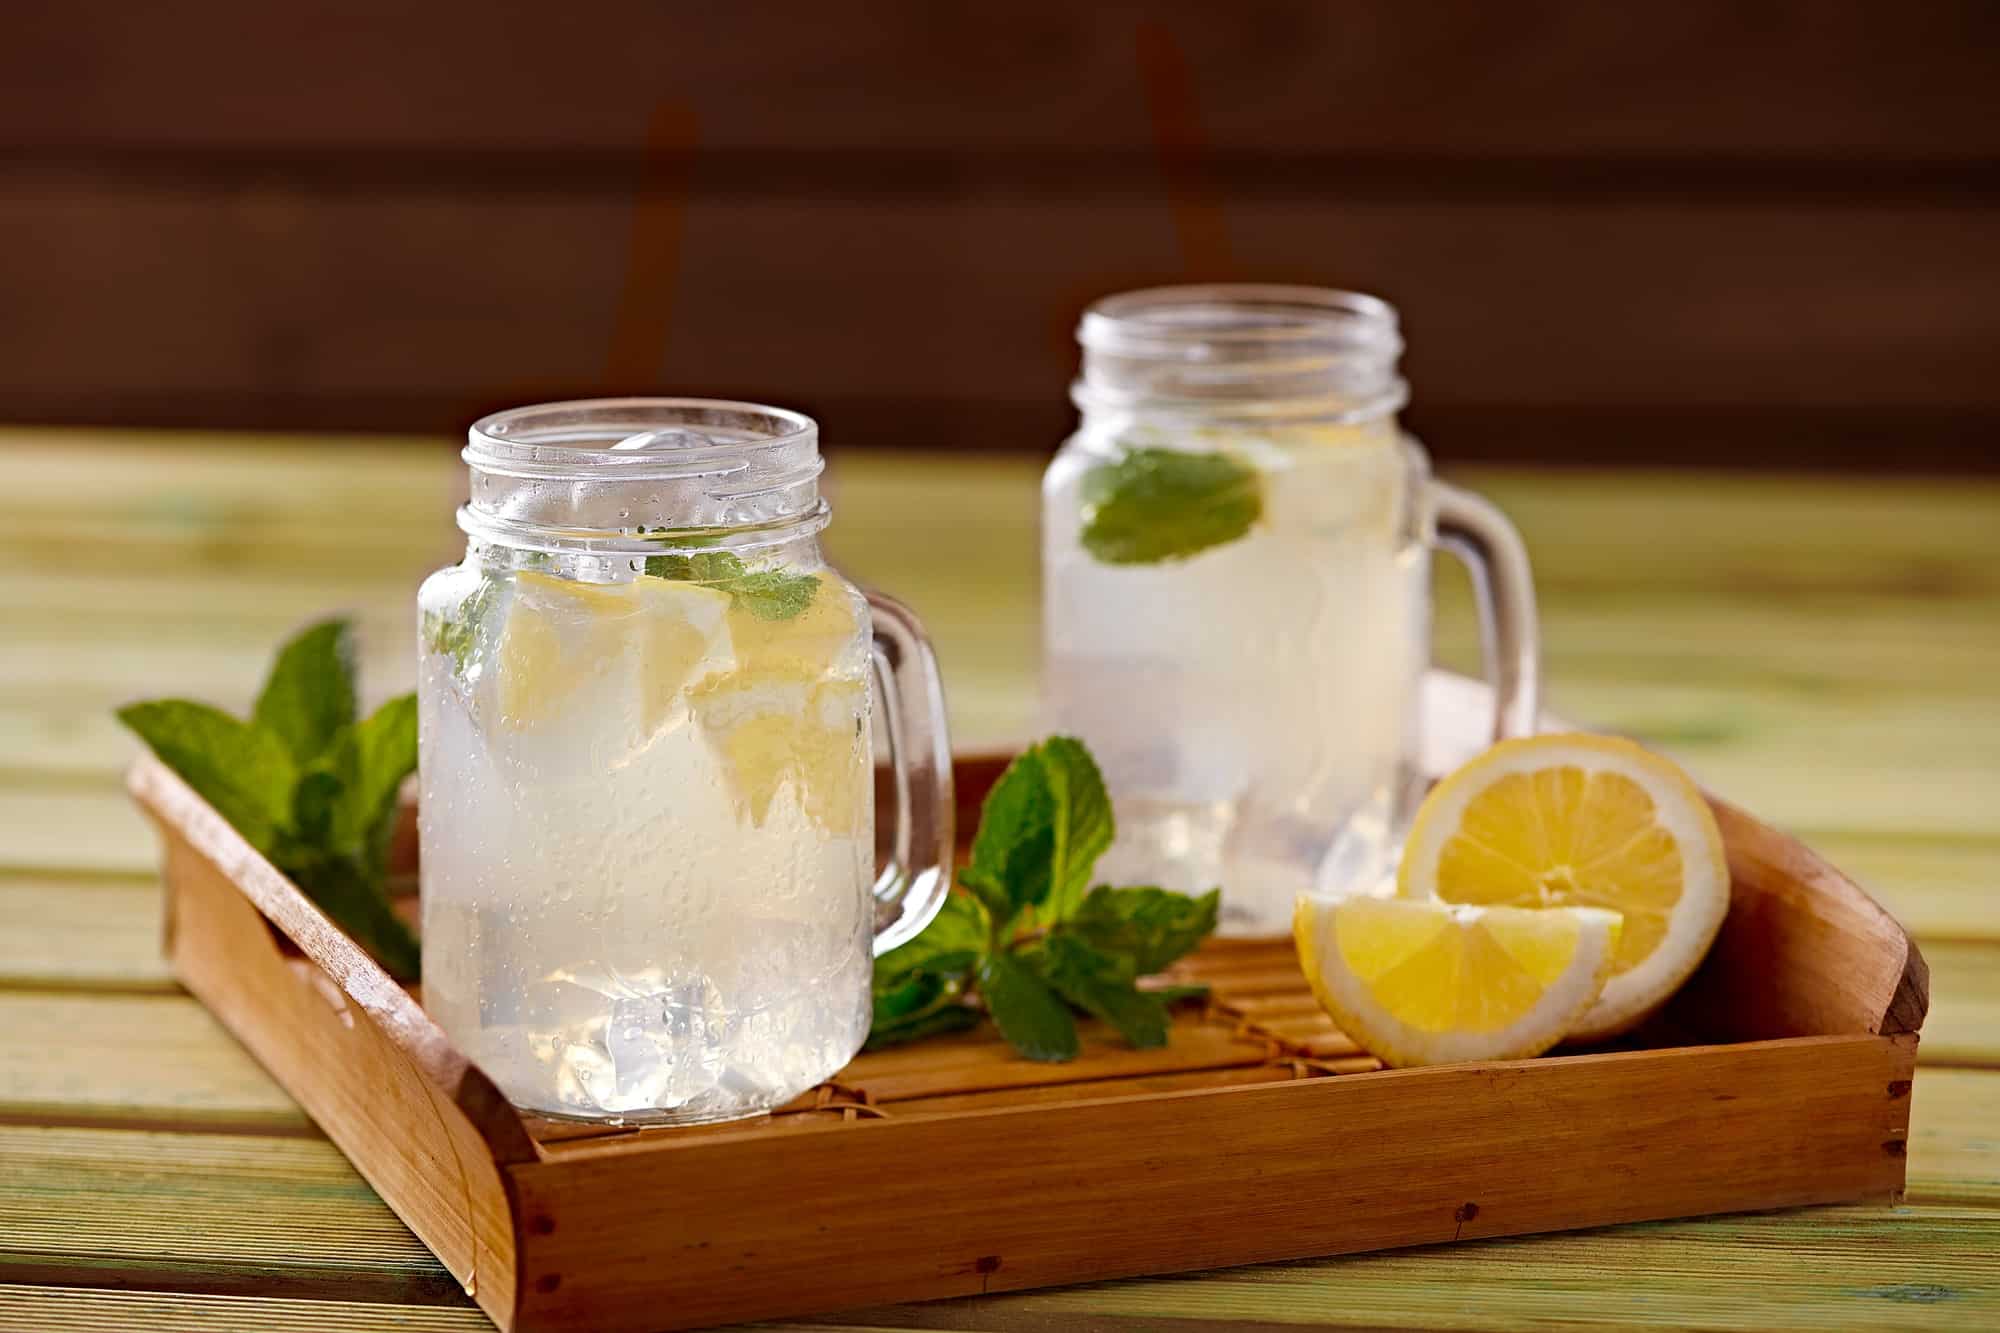 Wooden tray with served refreshing lemonade